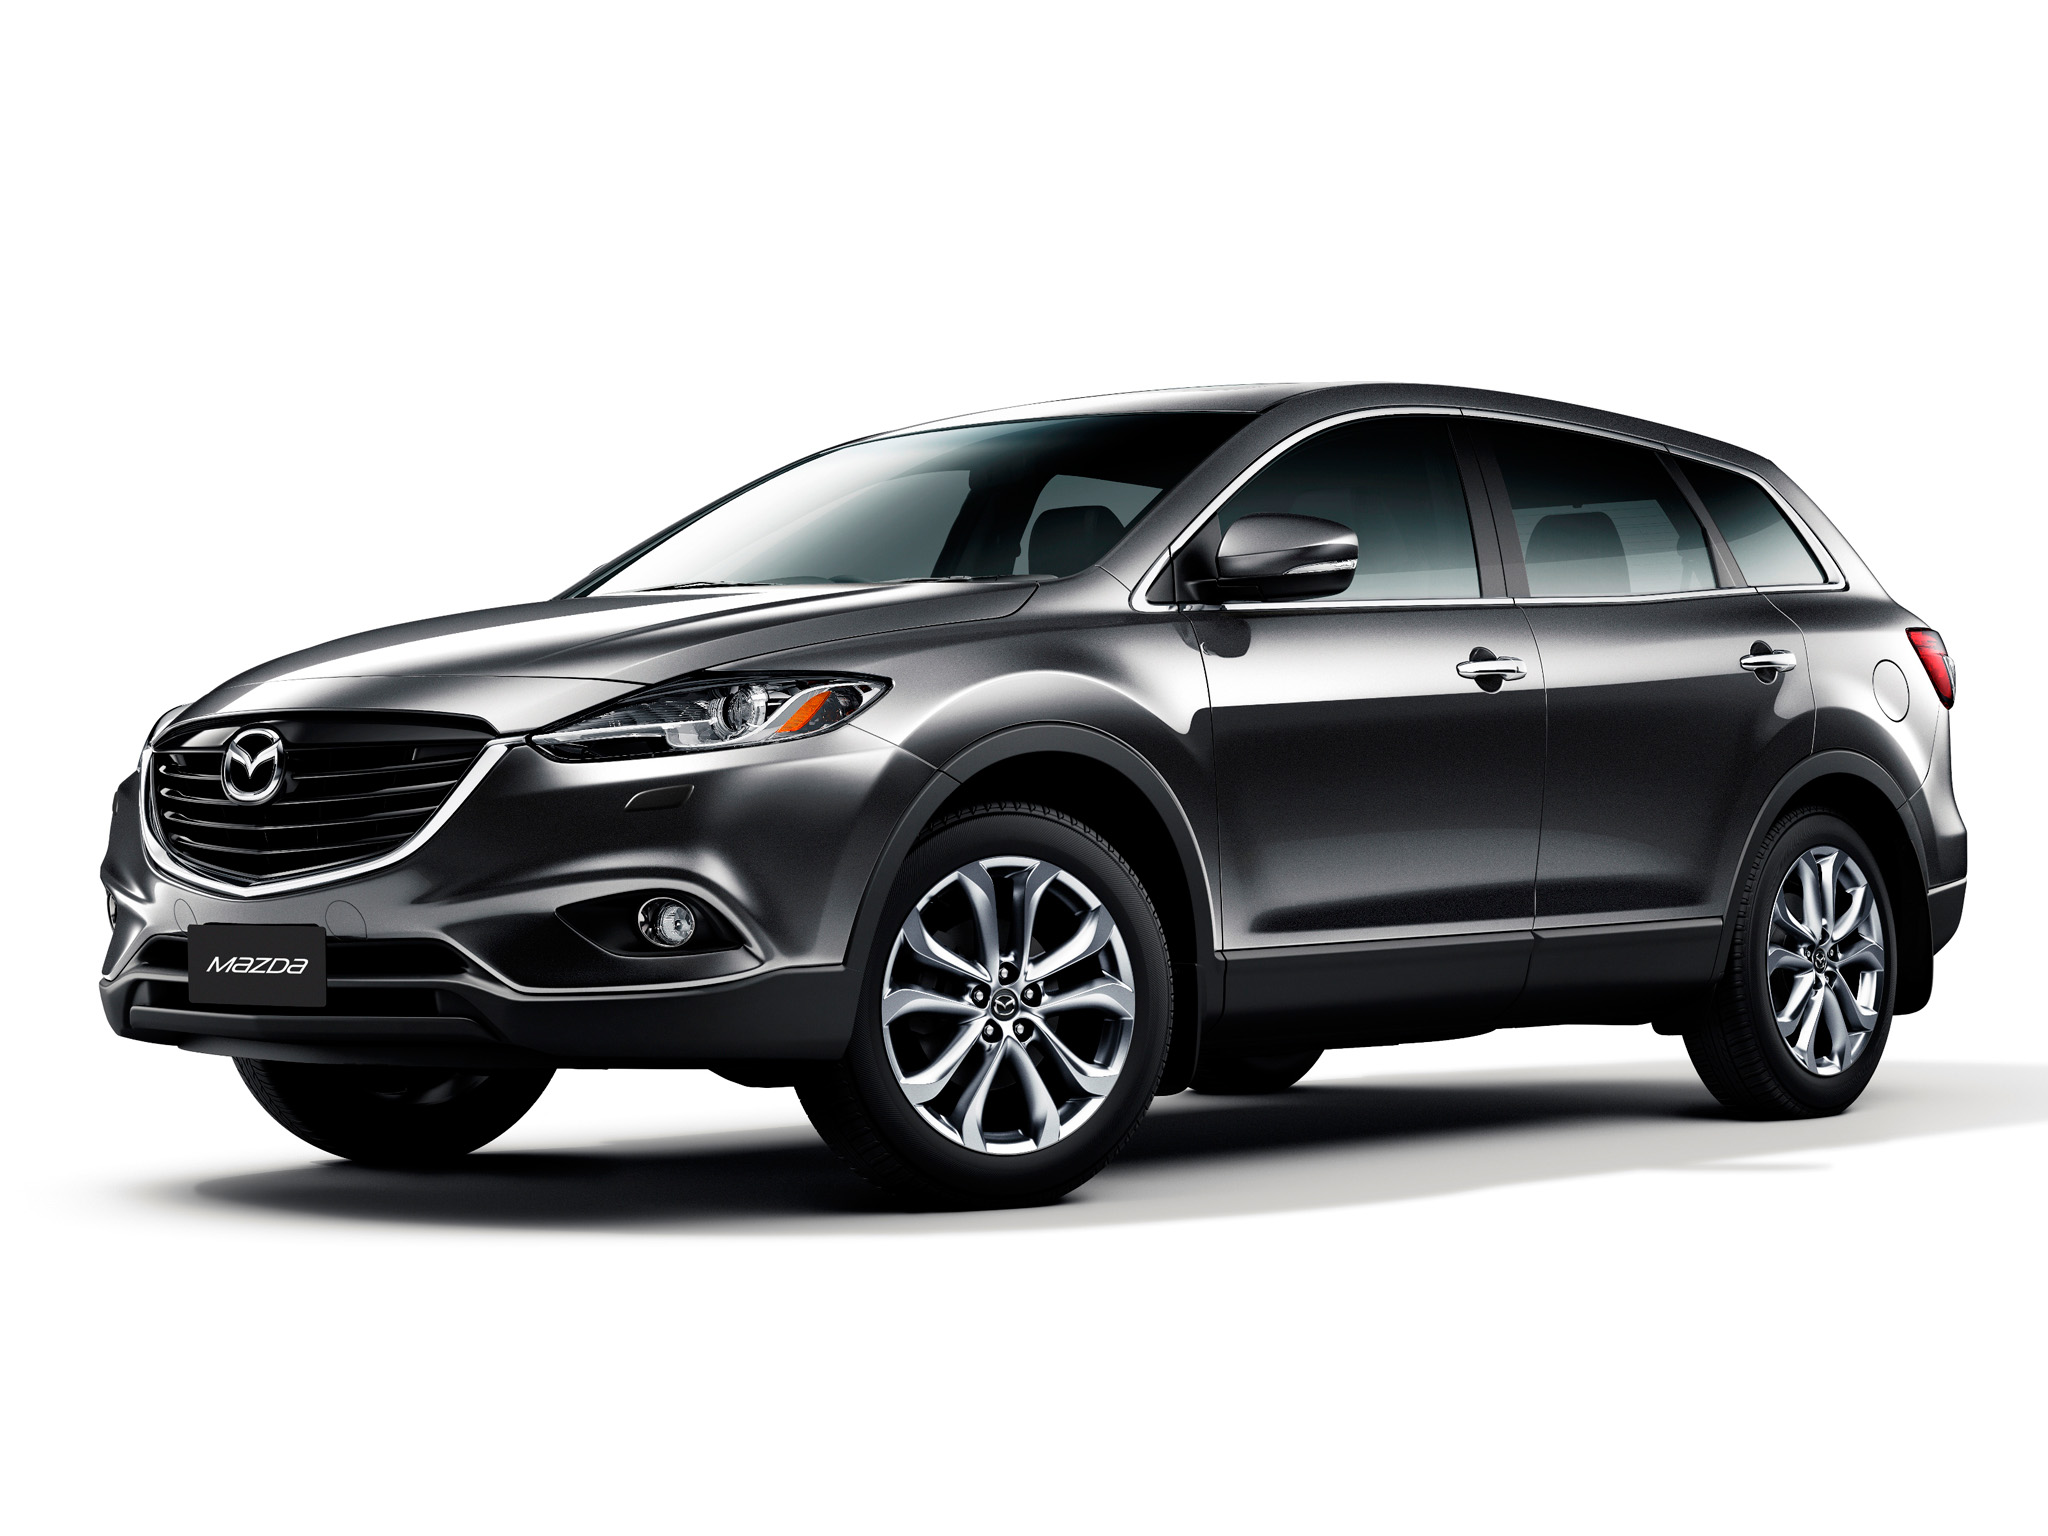 Car in pictures – car photo gallery » Mazda cx-9 2013 Photo 09